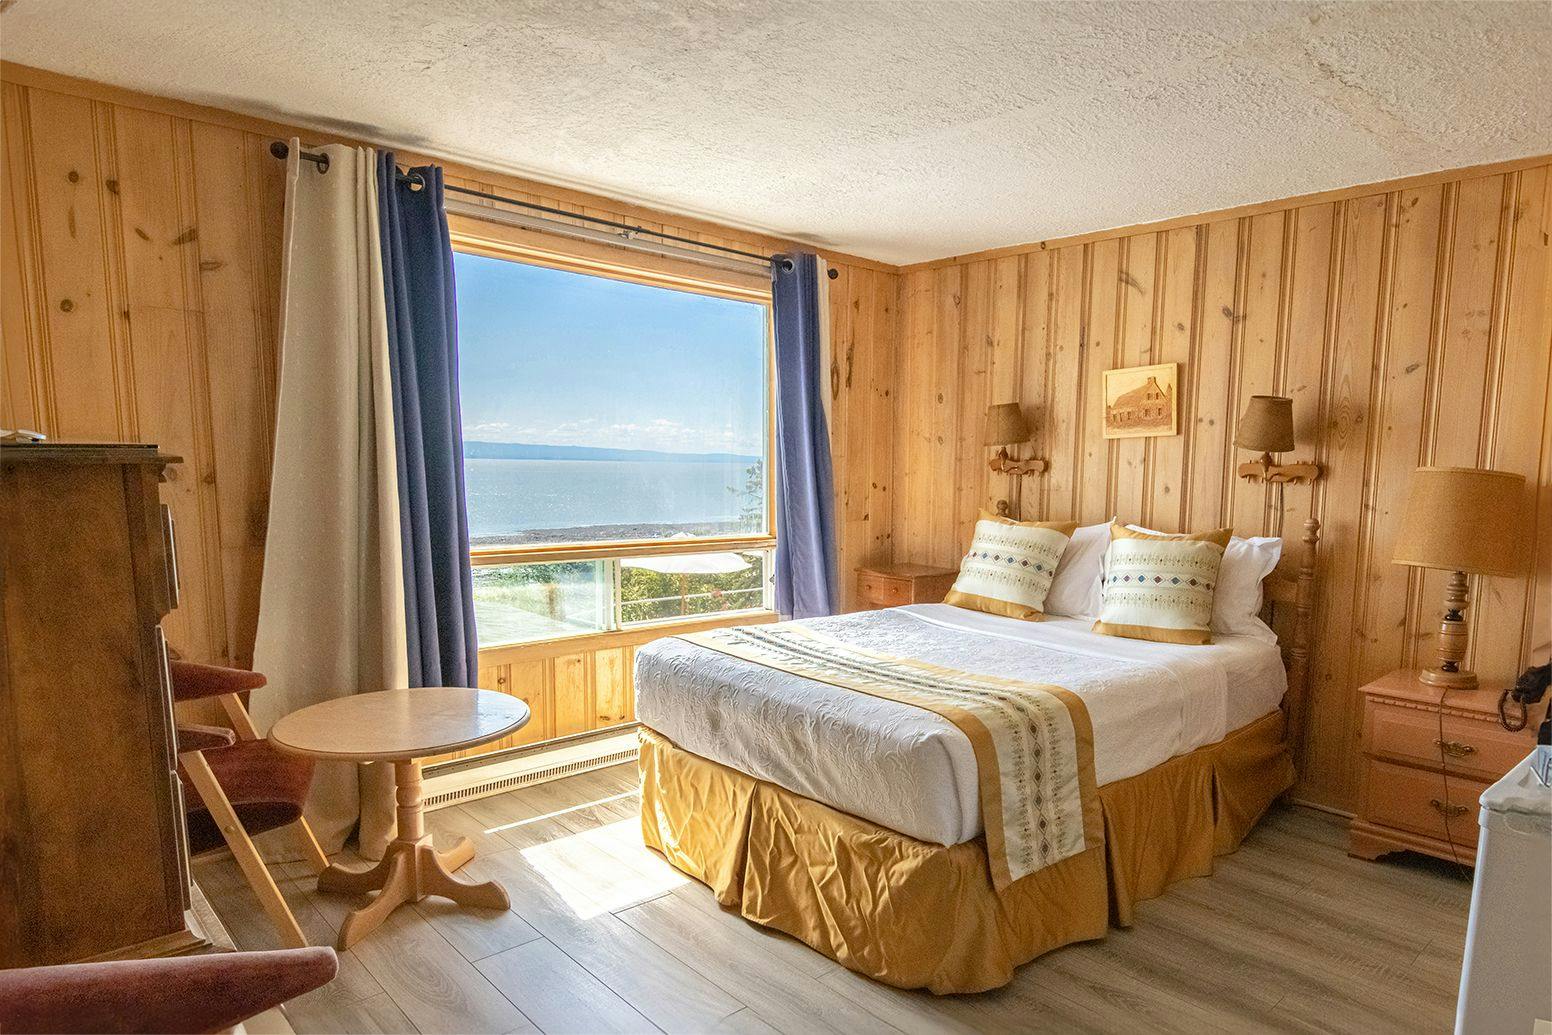 Image of Room 20 - Intermediate room with 1 queen bed facing the sea